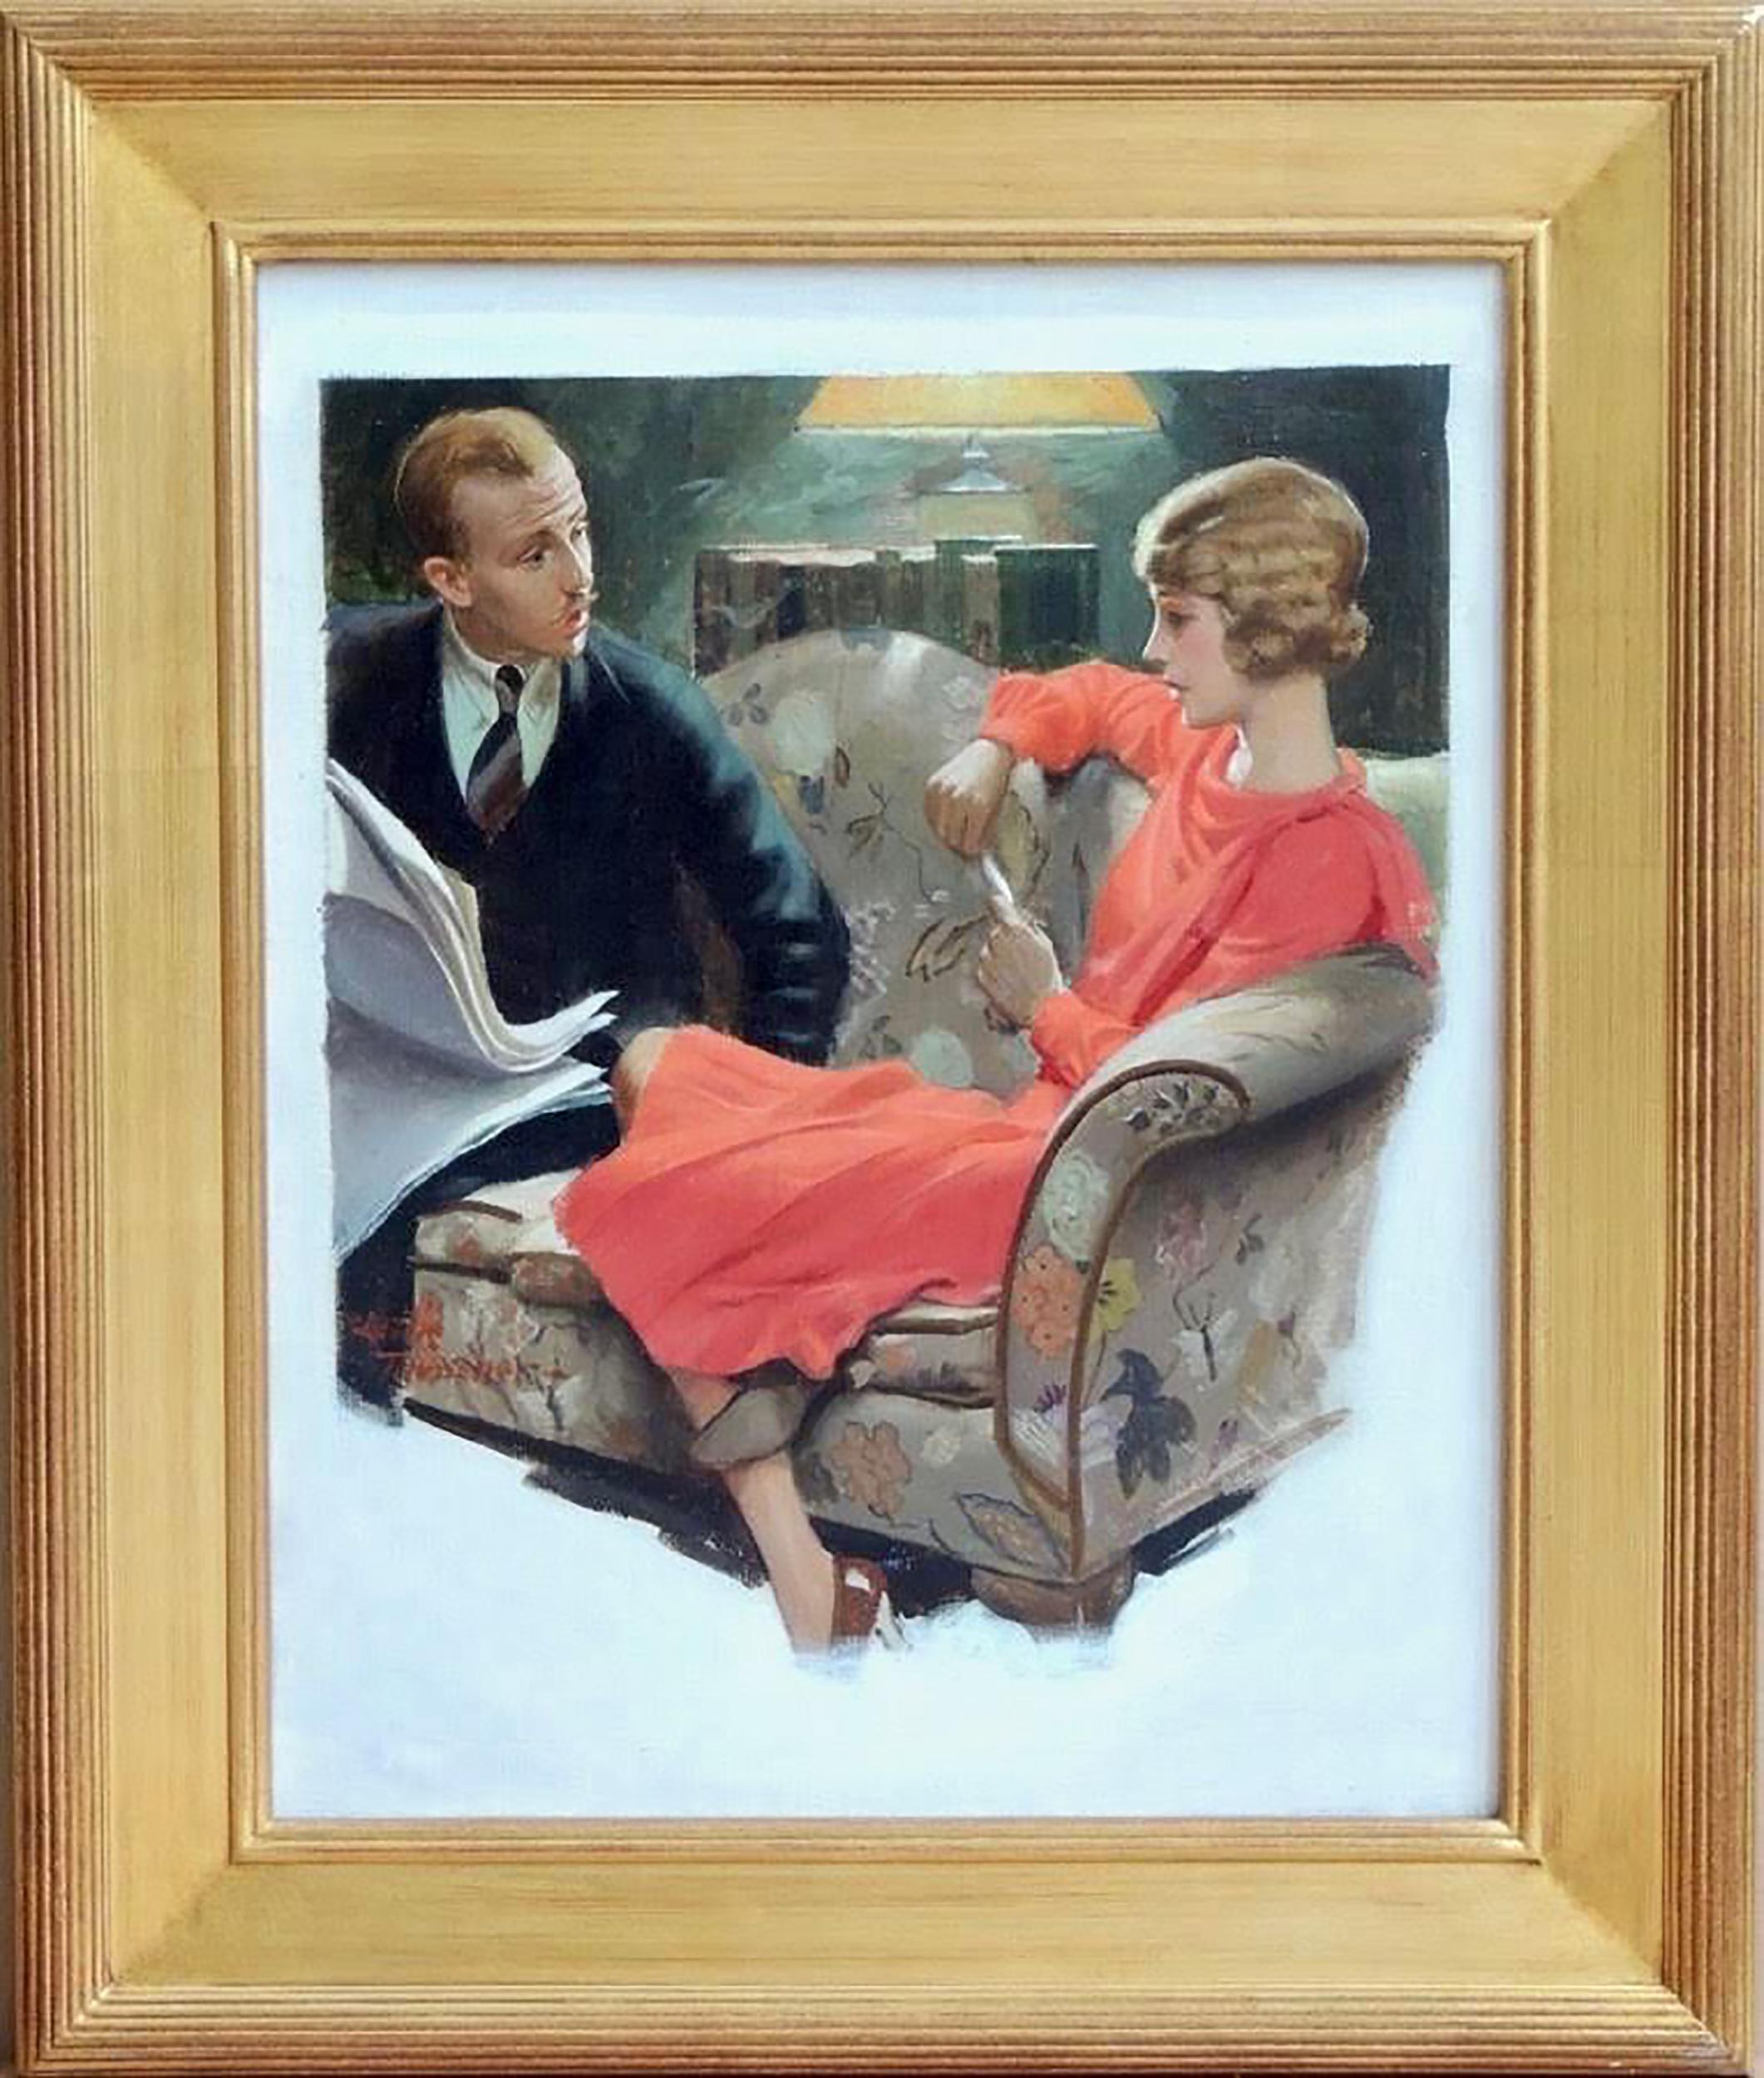 Sofa Talk, Liberty Magazine Cover - Painting by Leslie Thrasher